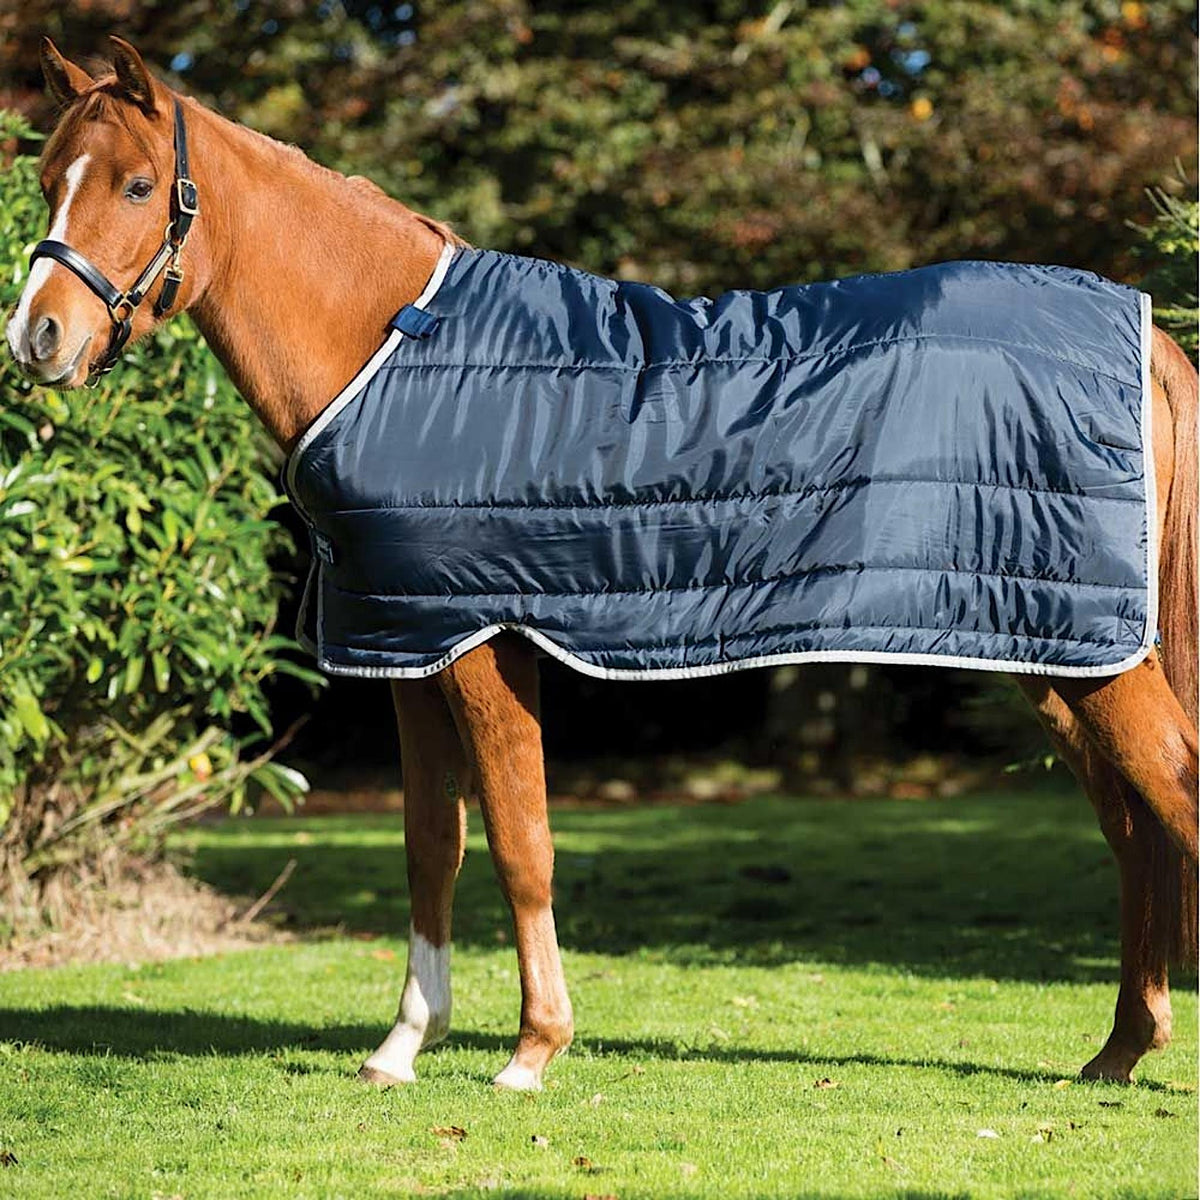 Sideview of horse with winter blue liner rug.